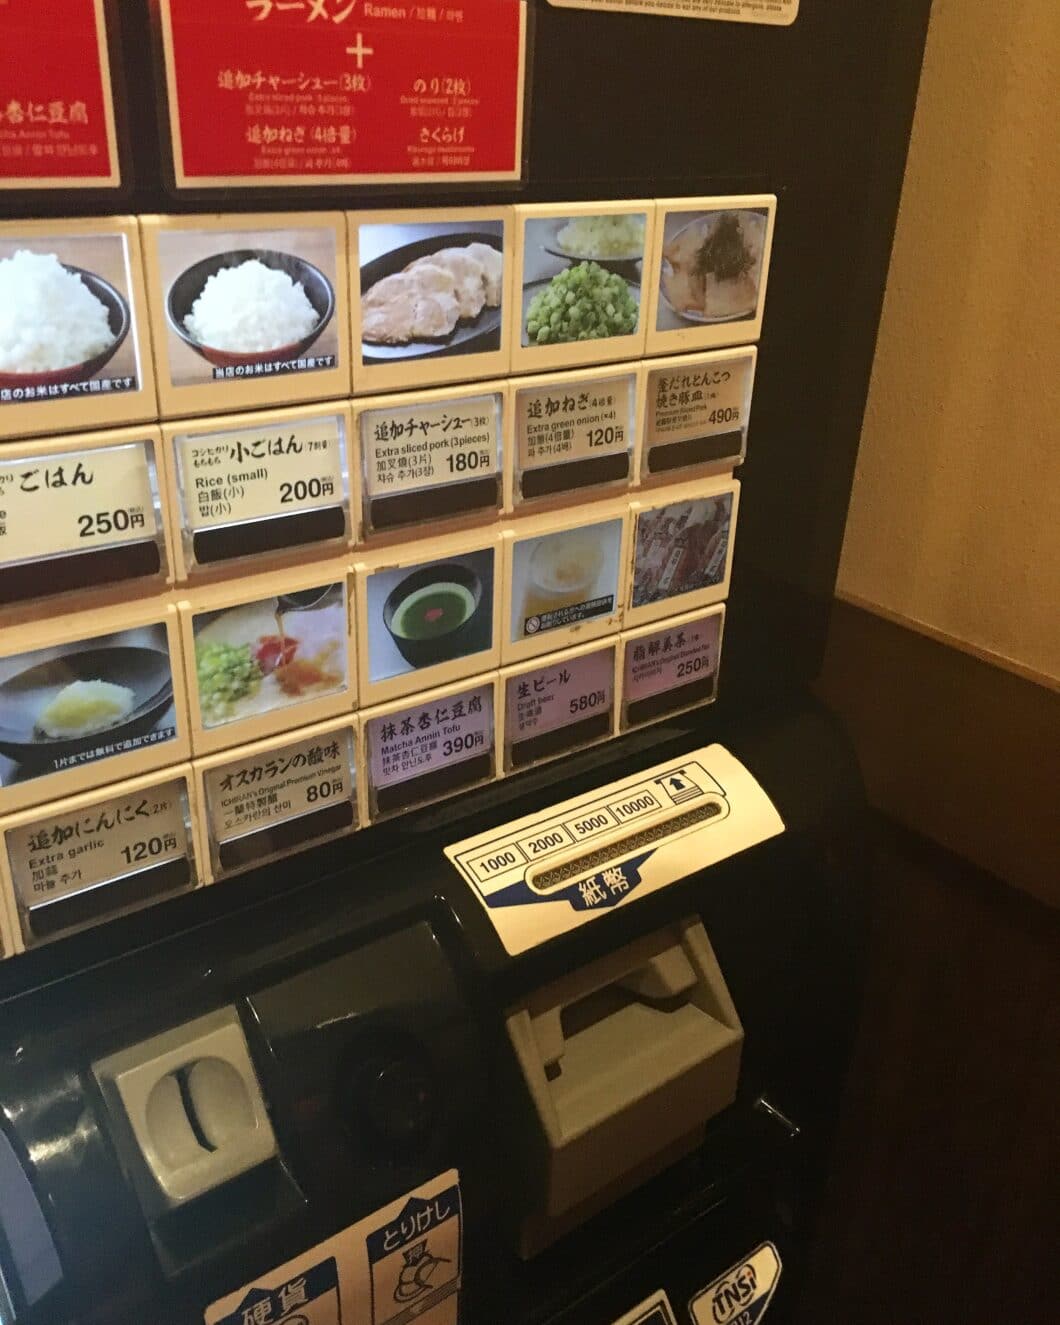 A Japanese food vending machine features small images of different dishes, from rice to means, ramen, and more.